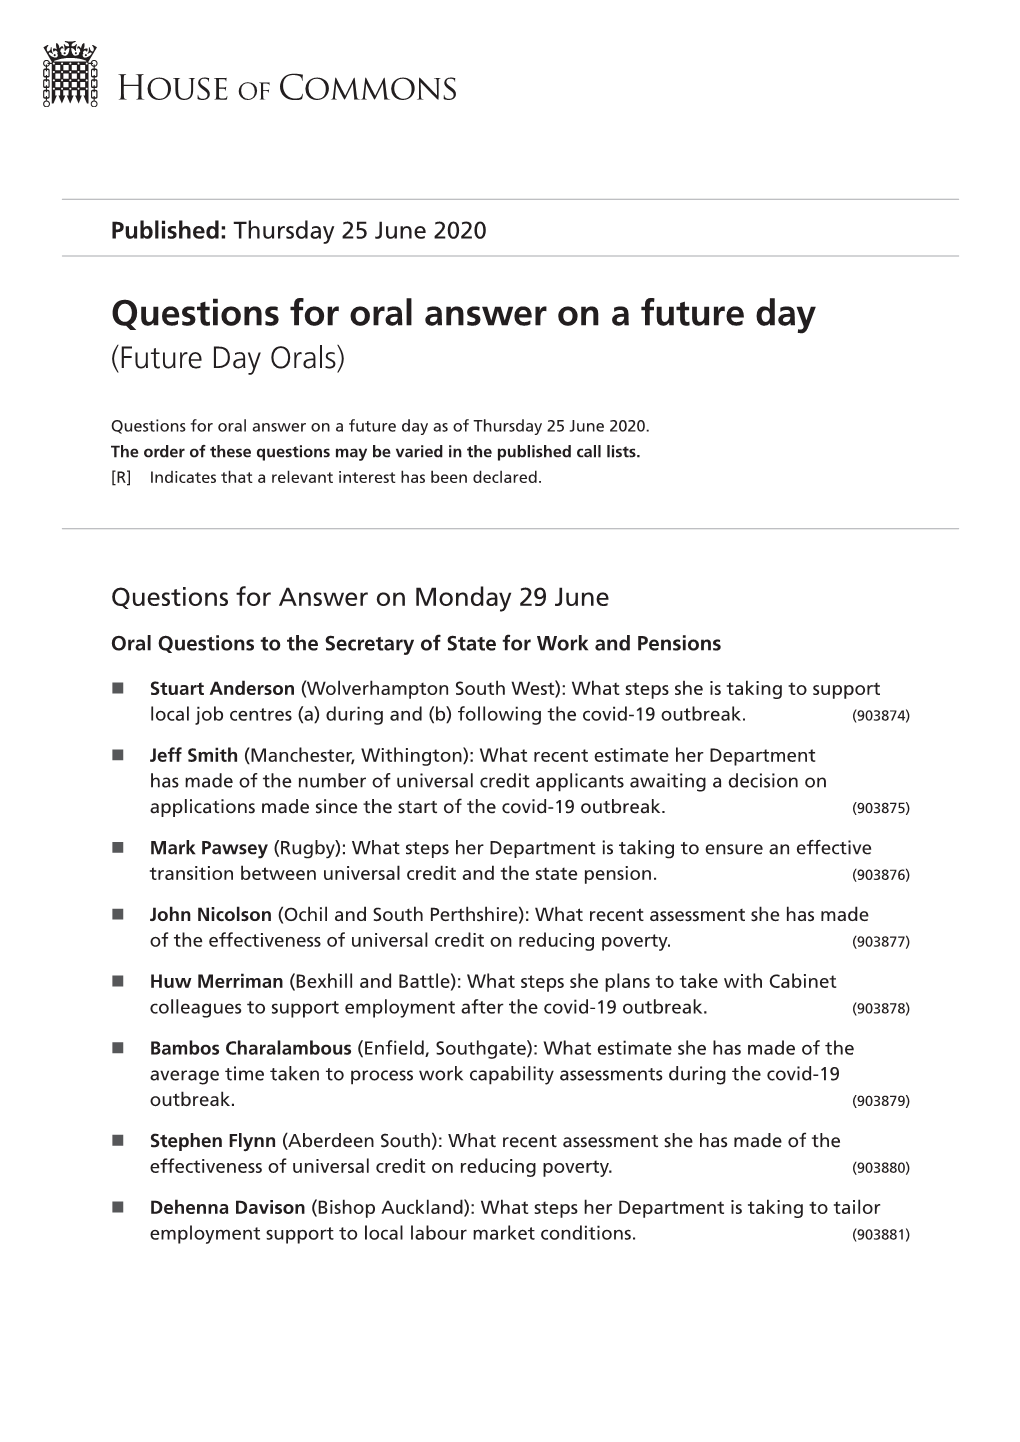 Future Oral Questions As of Thu 25 Jun 2020